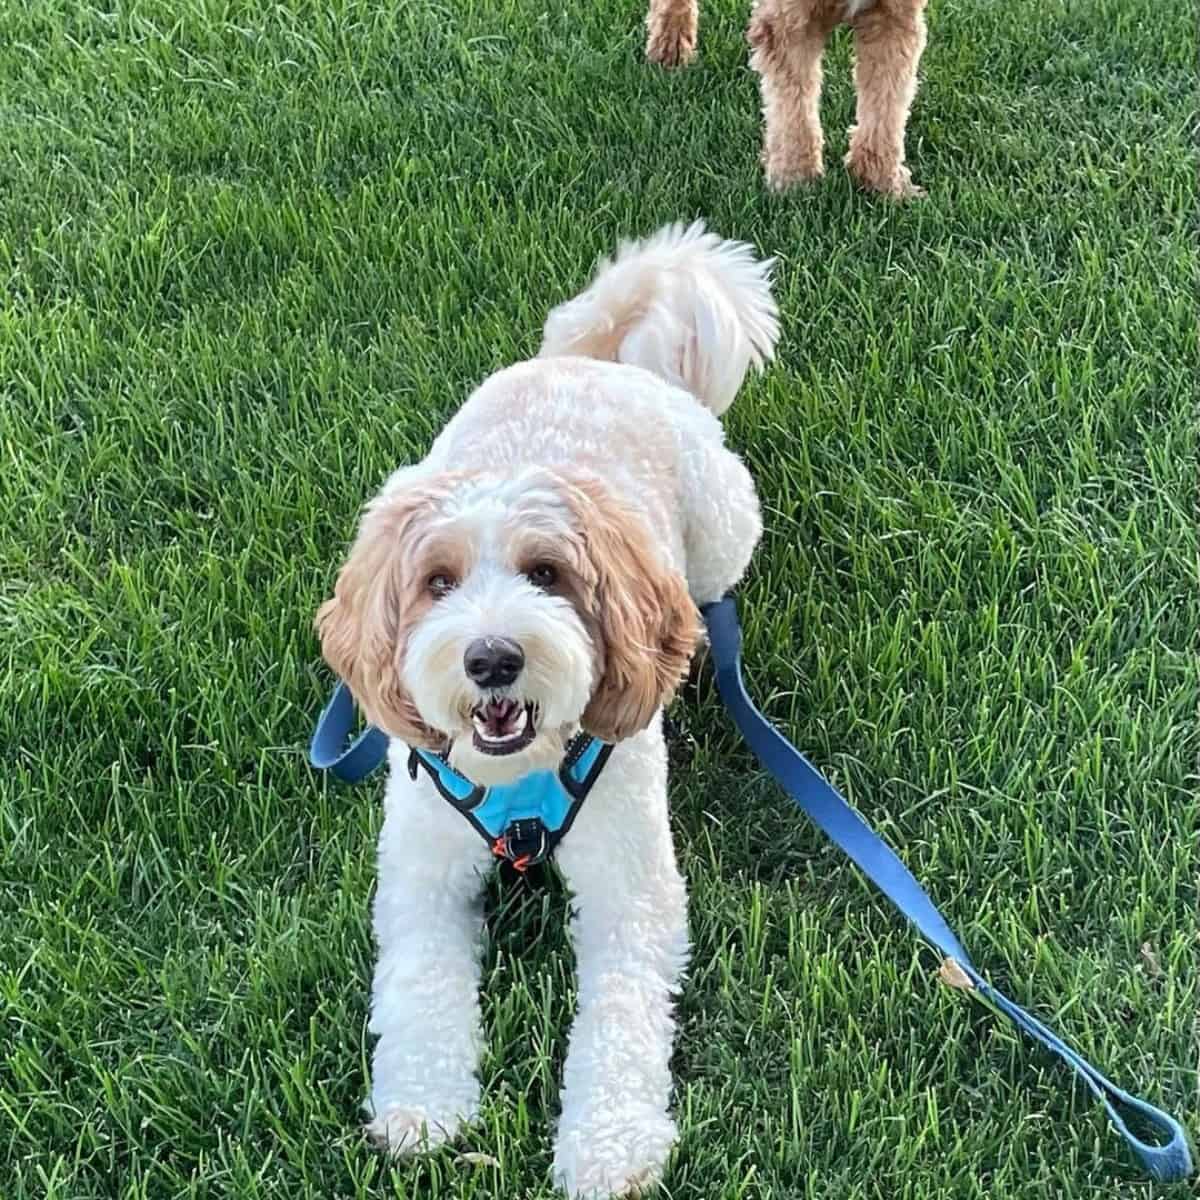 Labradoodle playing with another dog